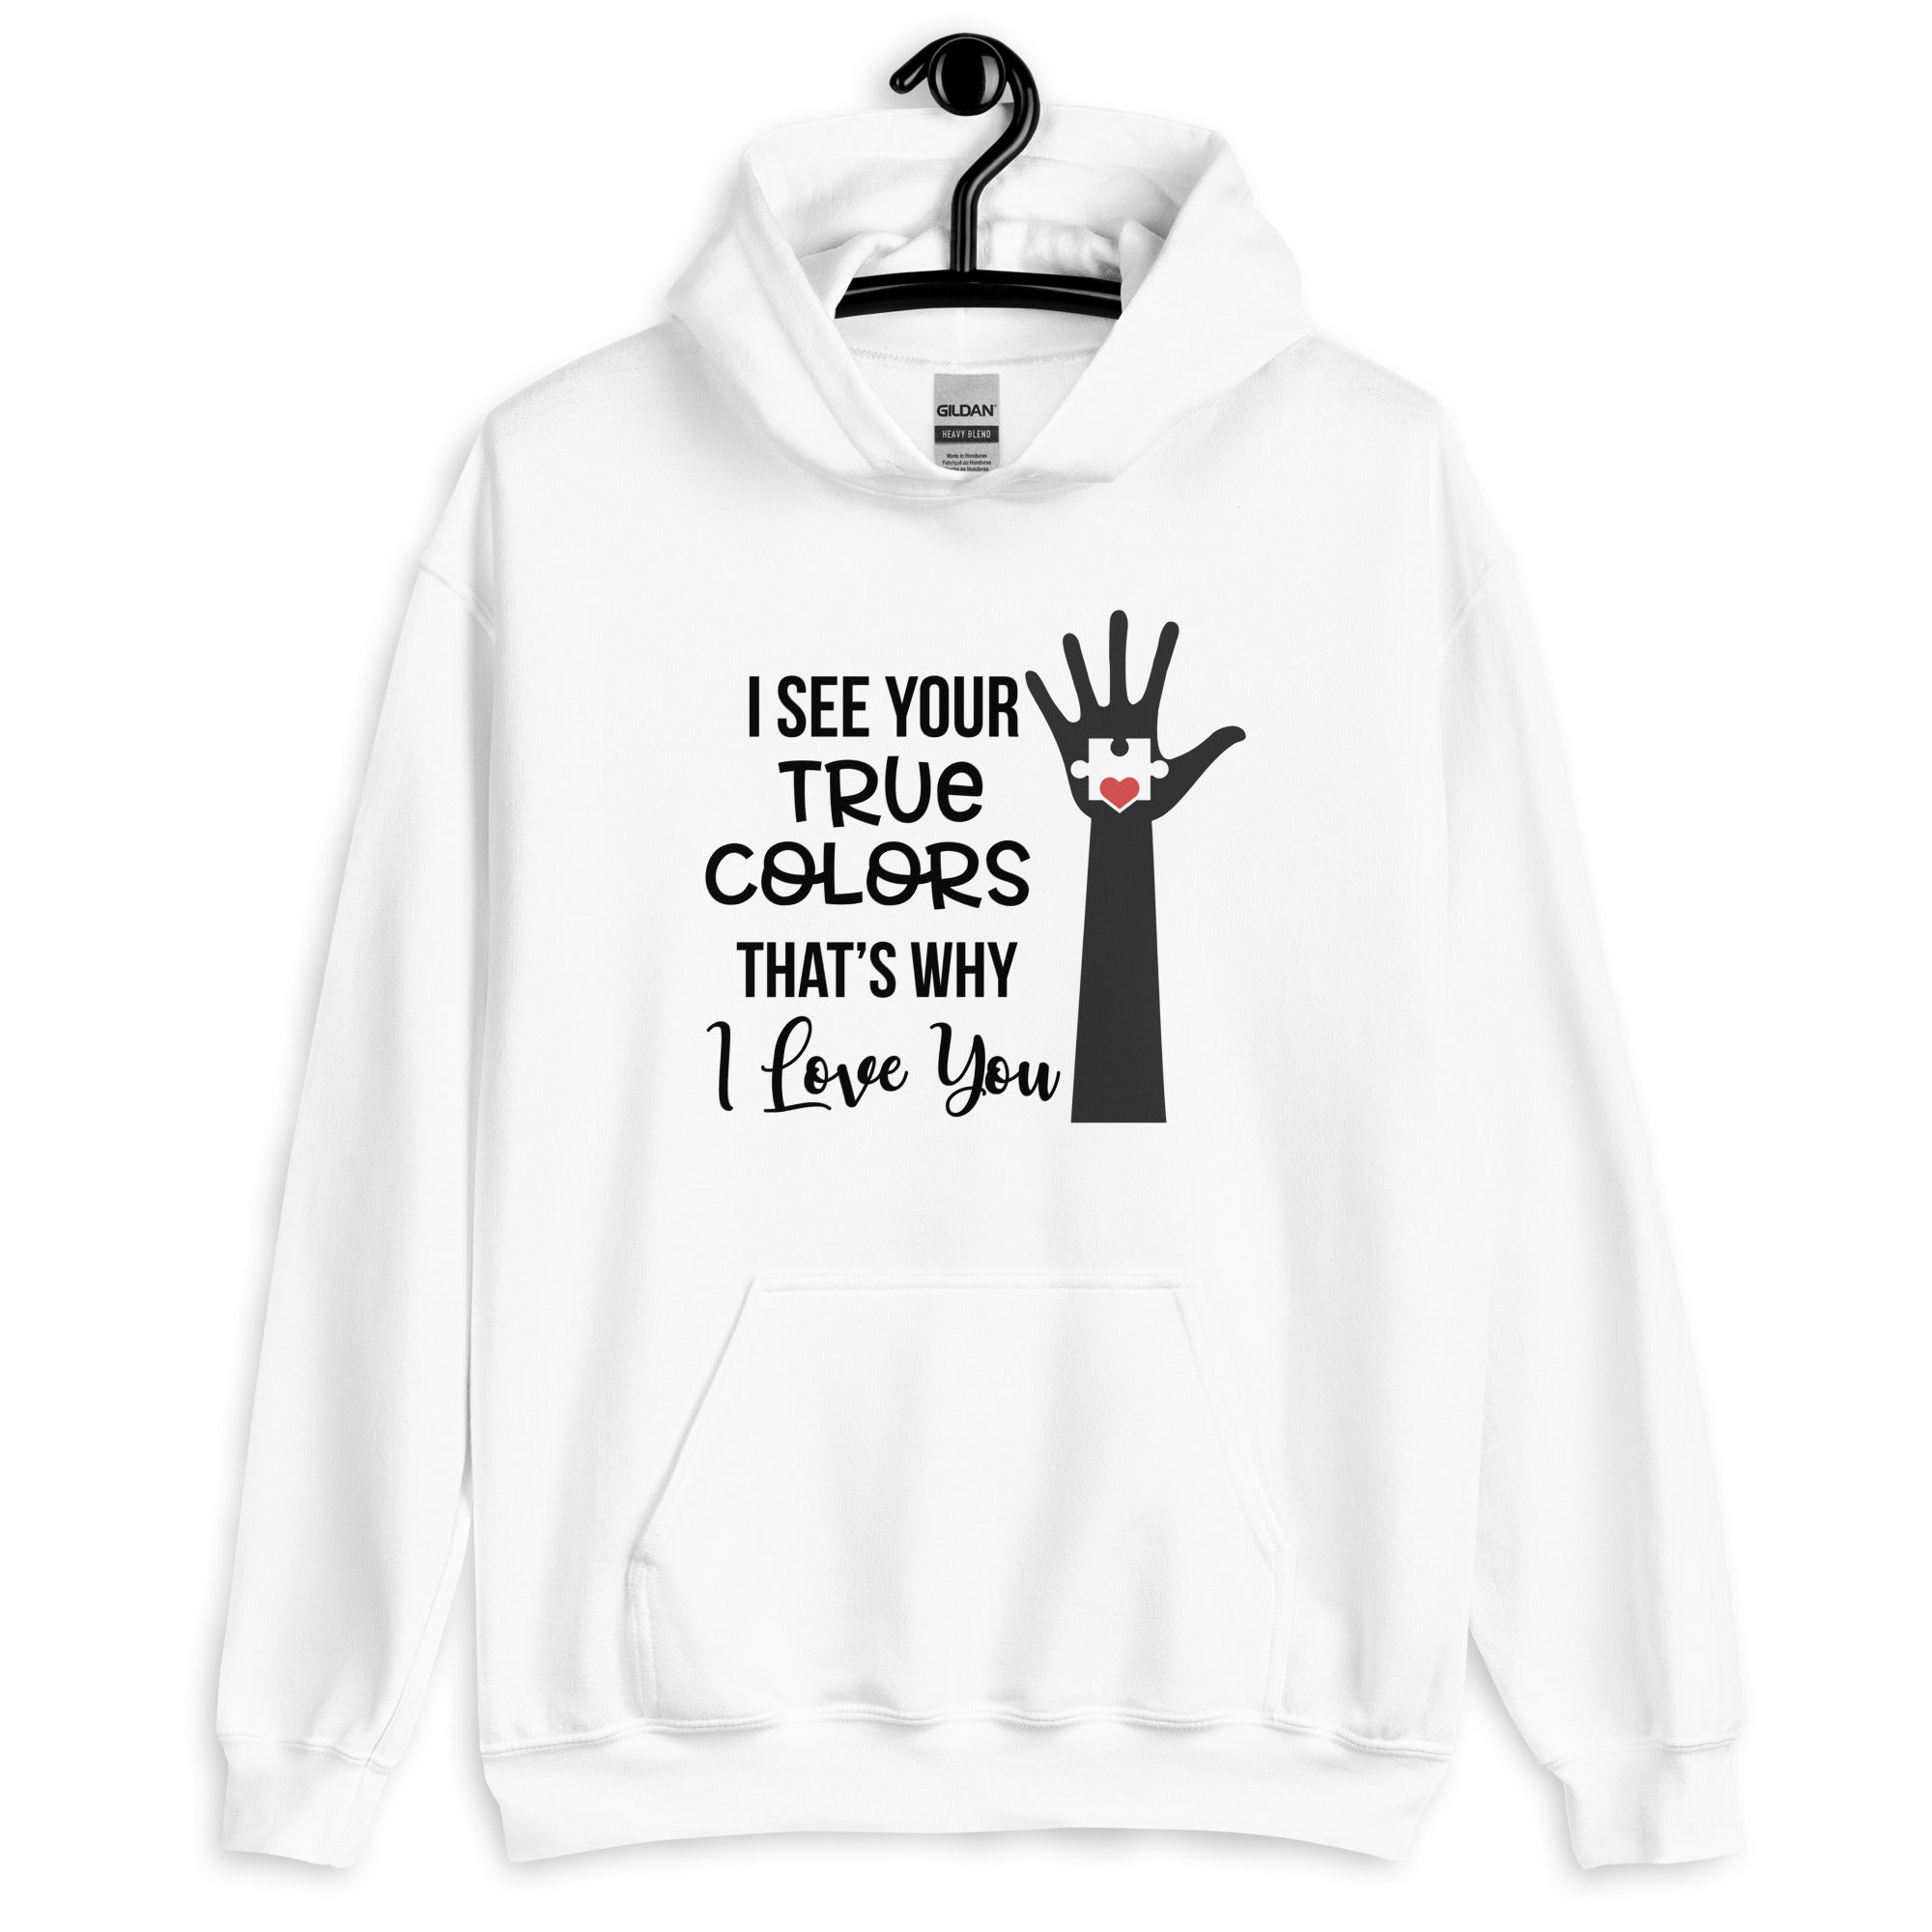 Unisex Hoodie- I see your True Colors